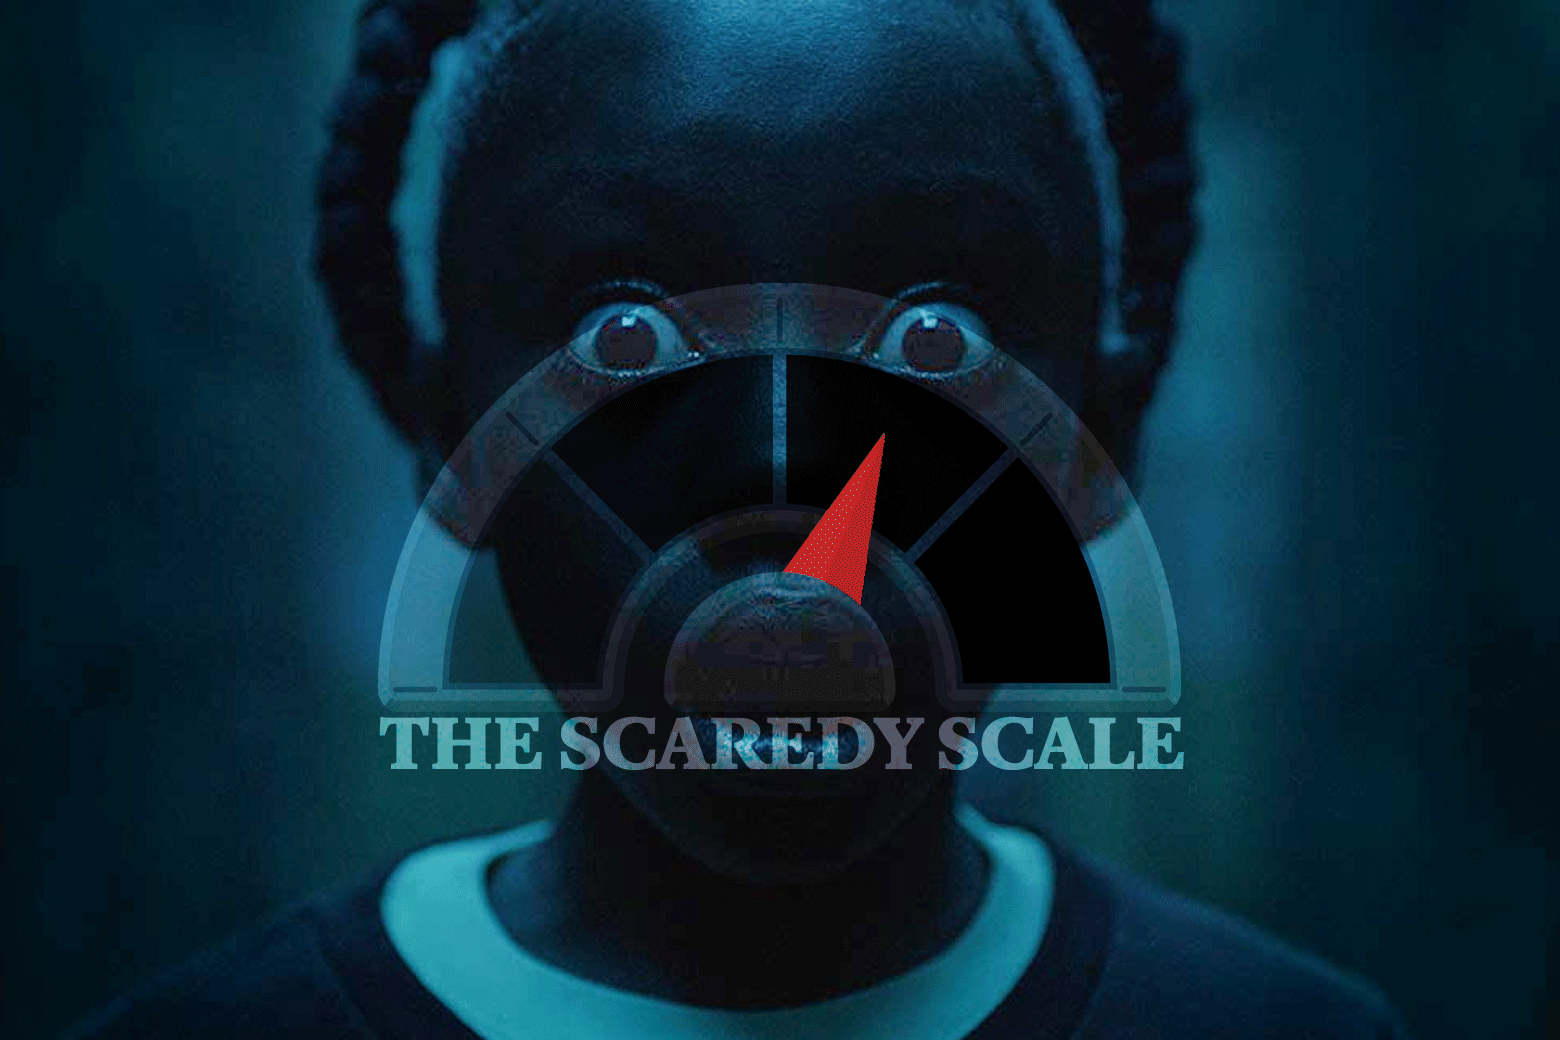 GIF: A still of the daughter from Us with a flickering "The Scaredy Scale" superimposed.